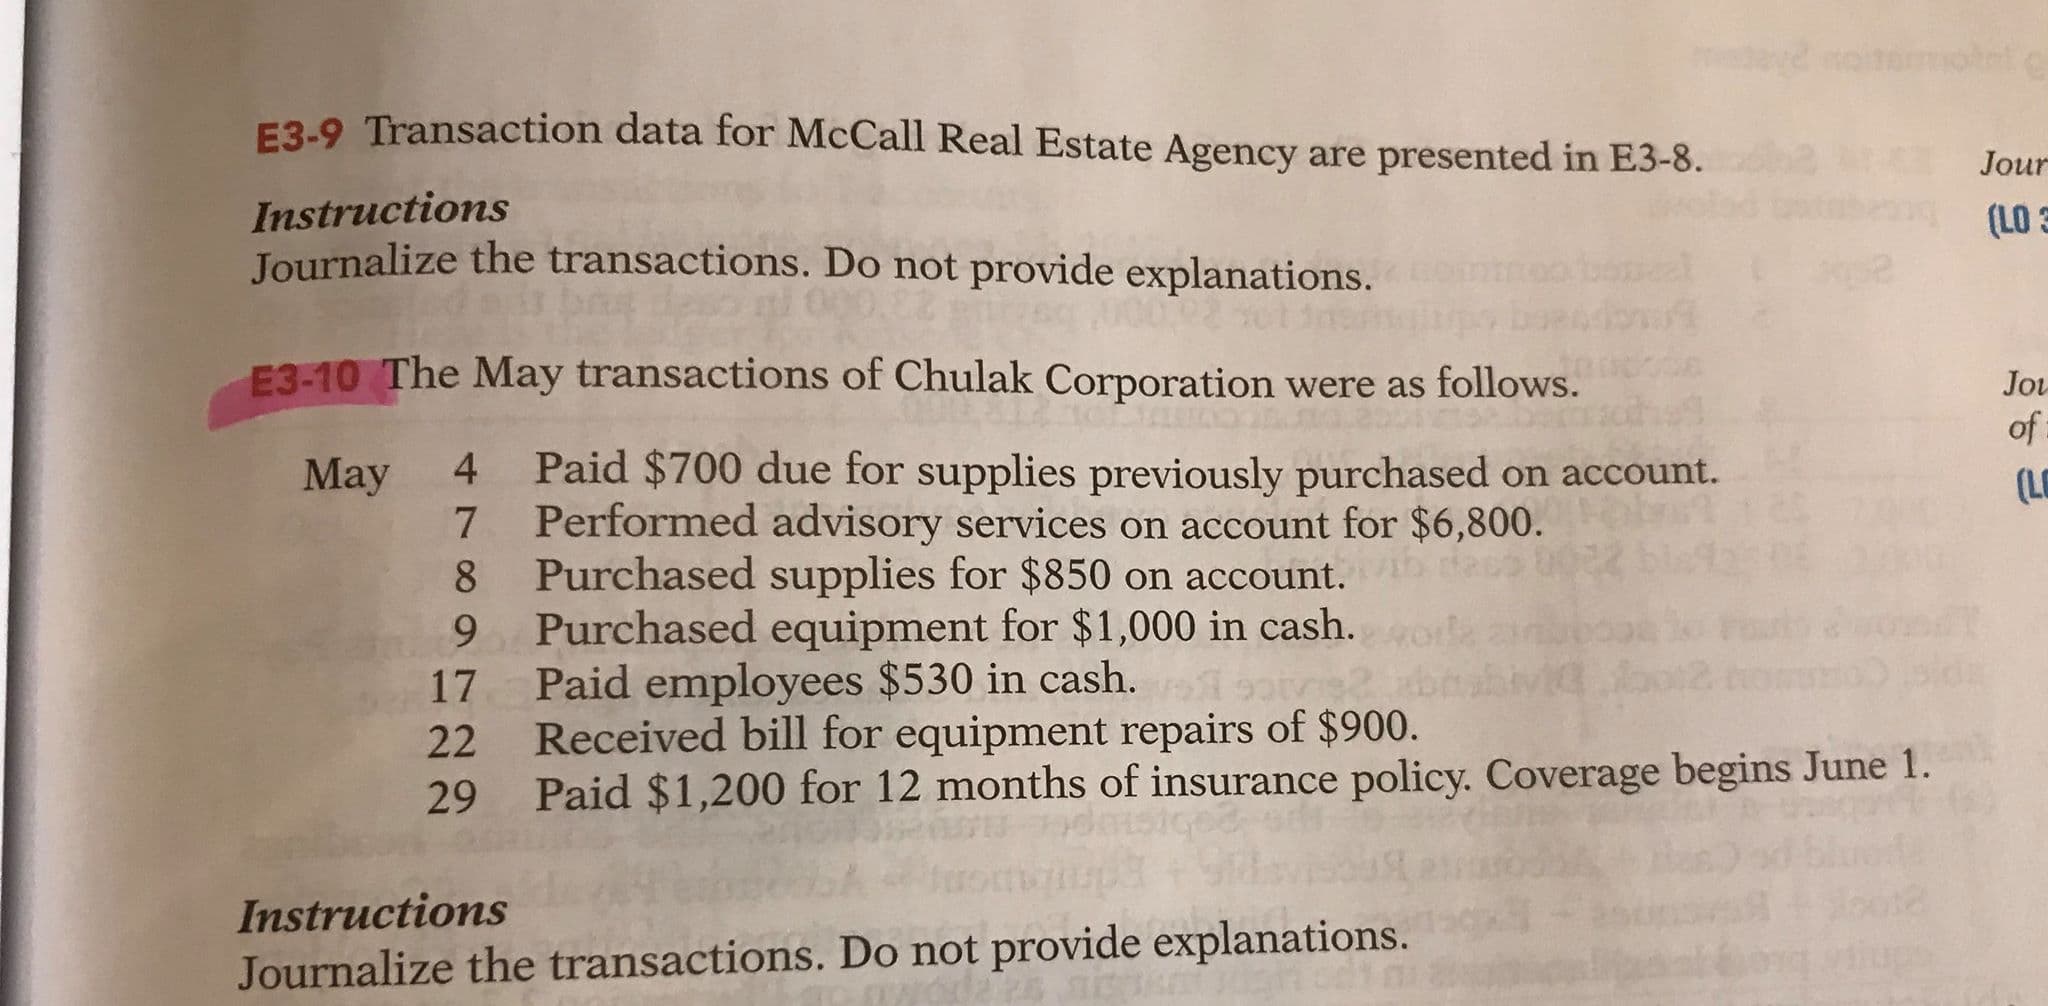 F3-9 Transaction data for McCall Real Estate Agency are presented in E3-8.
Jour
Instructions
Journalize the transactions. Do not provide explanations.
(LO 3
E3-10 The May transactions of Chulak Corporation were as follows.
Jou
of
Paid $700 due for supplies previously purchased on account.
Performed advisory services on account for $6,800.
Purchased supplies for $850 on account.
9 Purchased equipment for $1,000 in cash.
4.
May
(LO
sot
Paid employees $530 in cash.
17
Received bill for equipment repairs of $900.
Paid $1,200 for 12 months of insurance policy. Coverage begins June 1.
22
29
Instructions
Journalize the transactions. Do not provide explanations.
